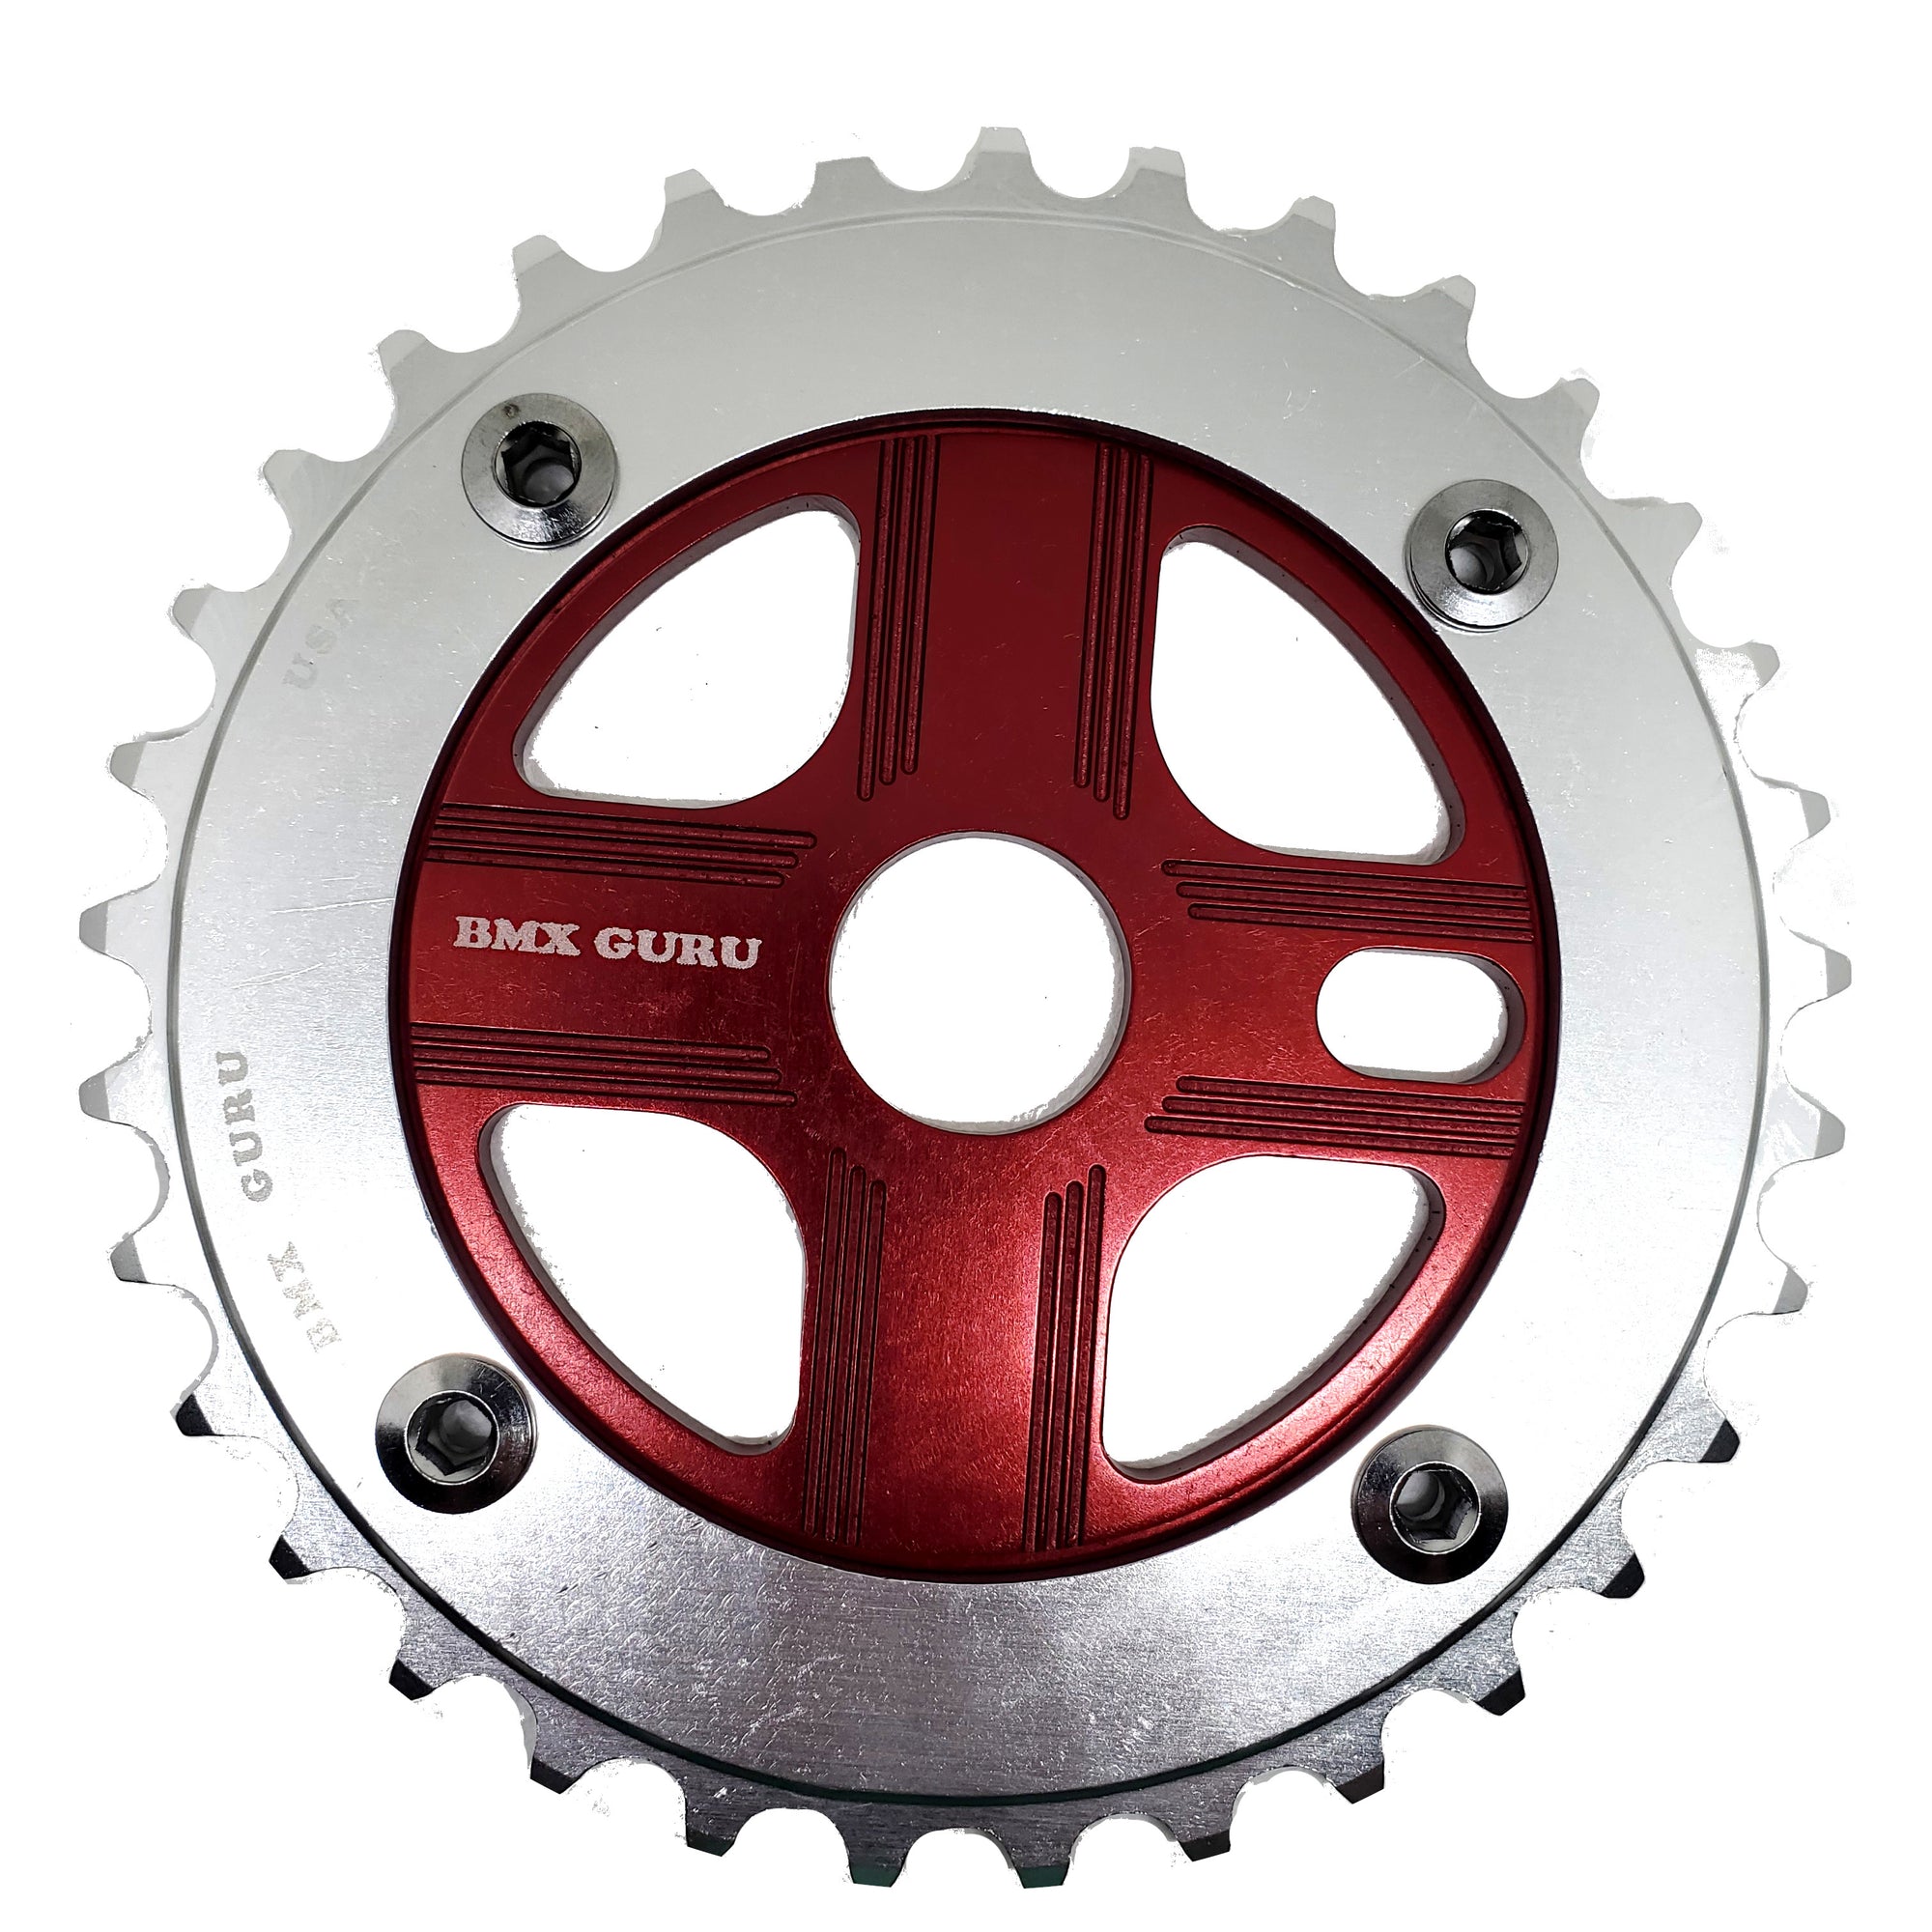 BMXGuru 33T Aluminum Spider & 4-bolt Chainring Combo - Silver over Red - USA Made